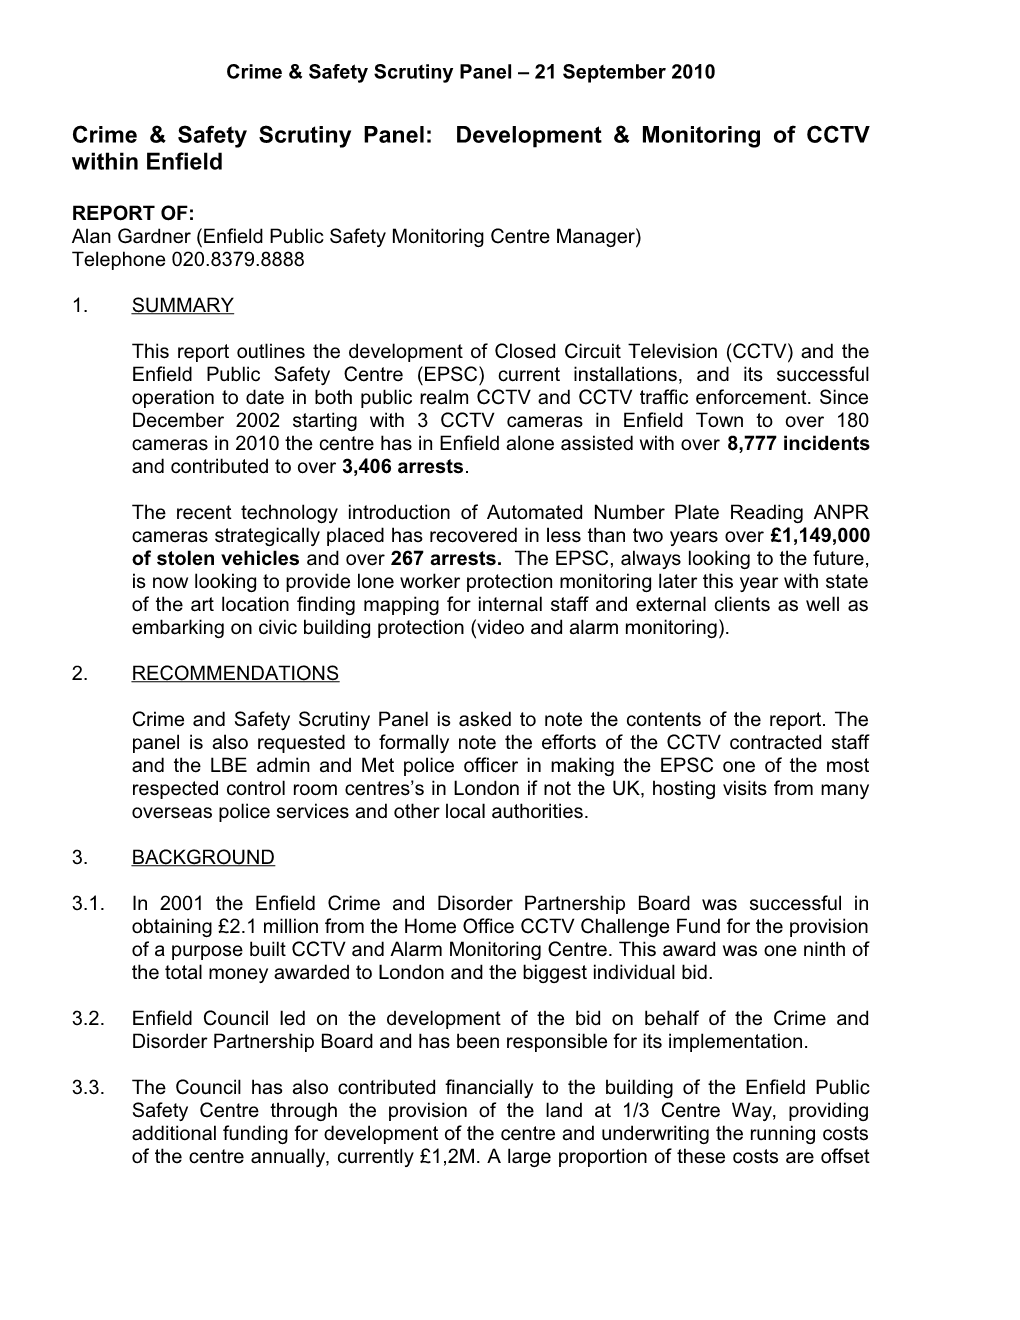 Crime & Safety Scrutiny Panel: Development & Monitoring of CCTV Within Enfield